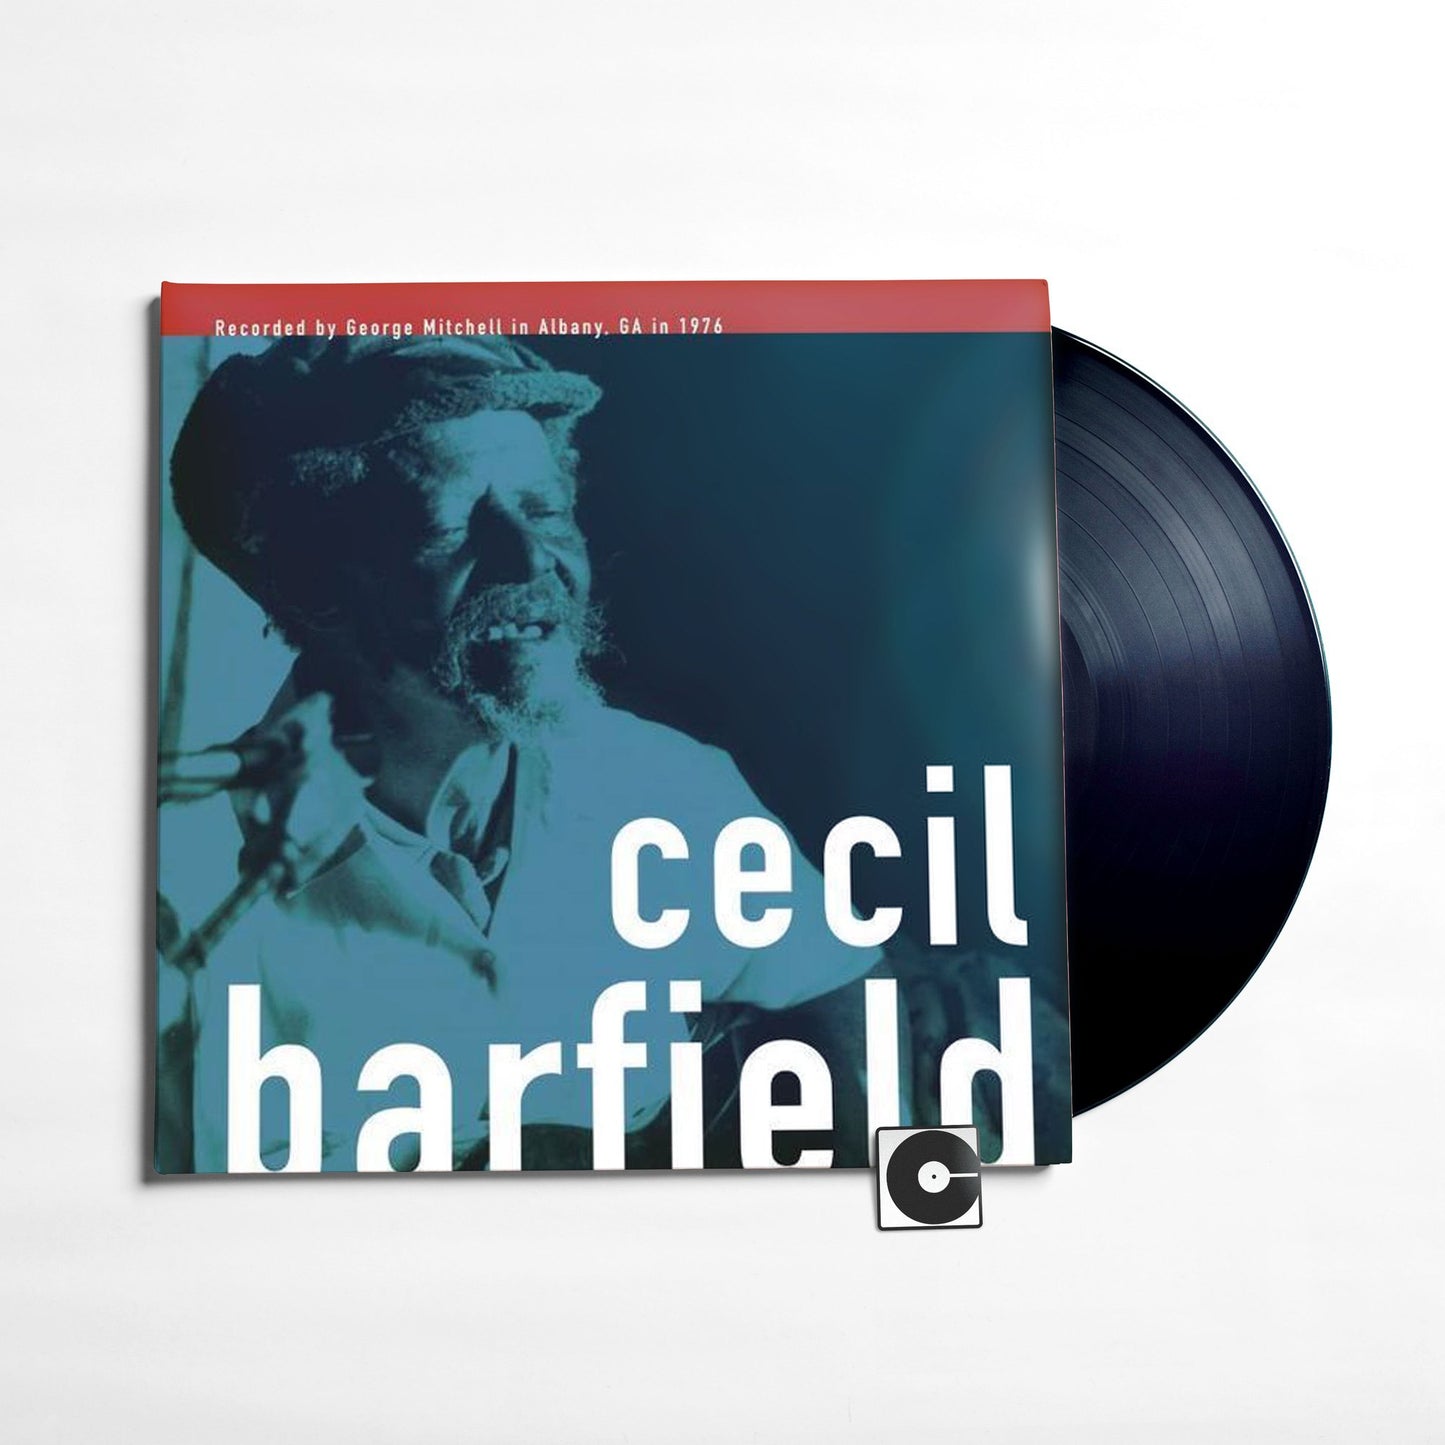 Cecil Barfield - "The George Mitchell Collection"